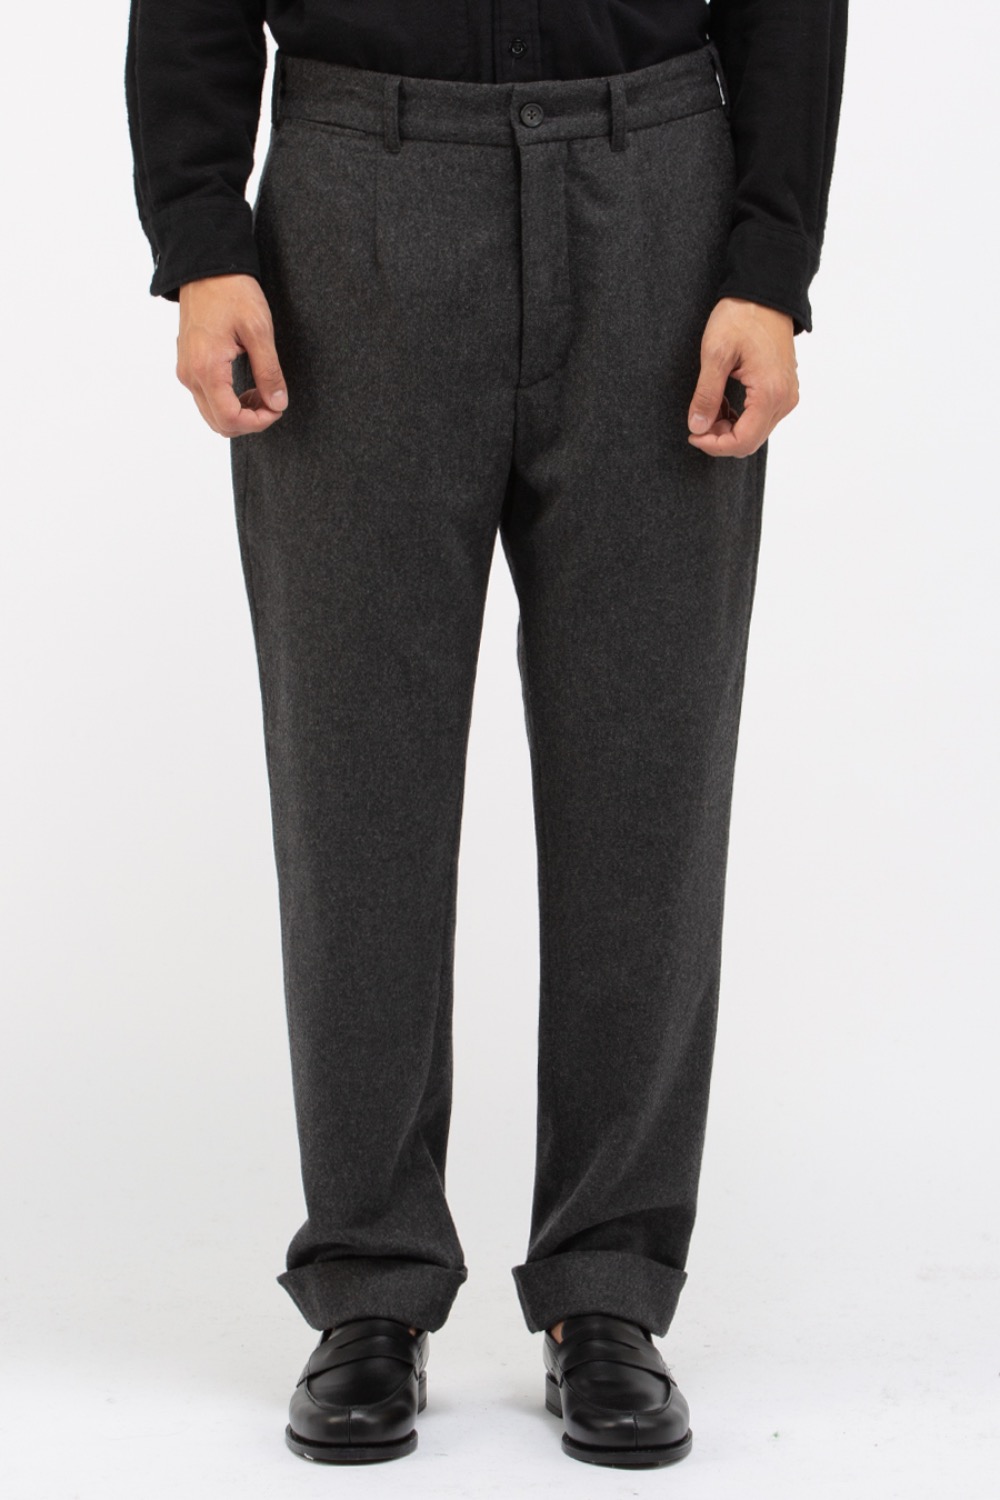 ANDOVER PANT GREY WOOL CASHMERE FLANNEL